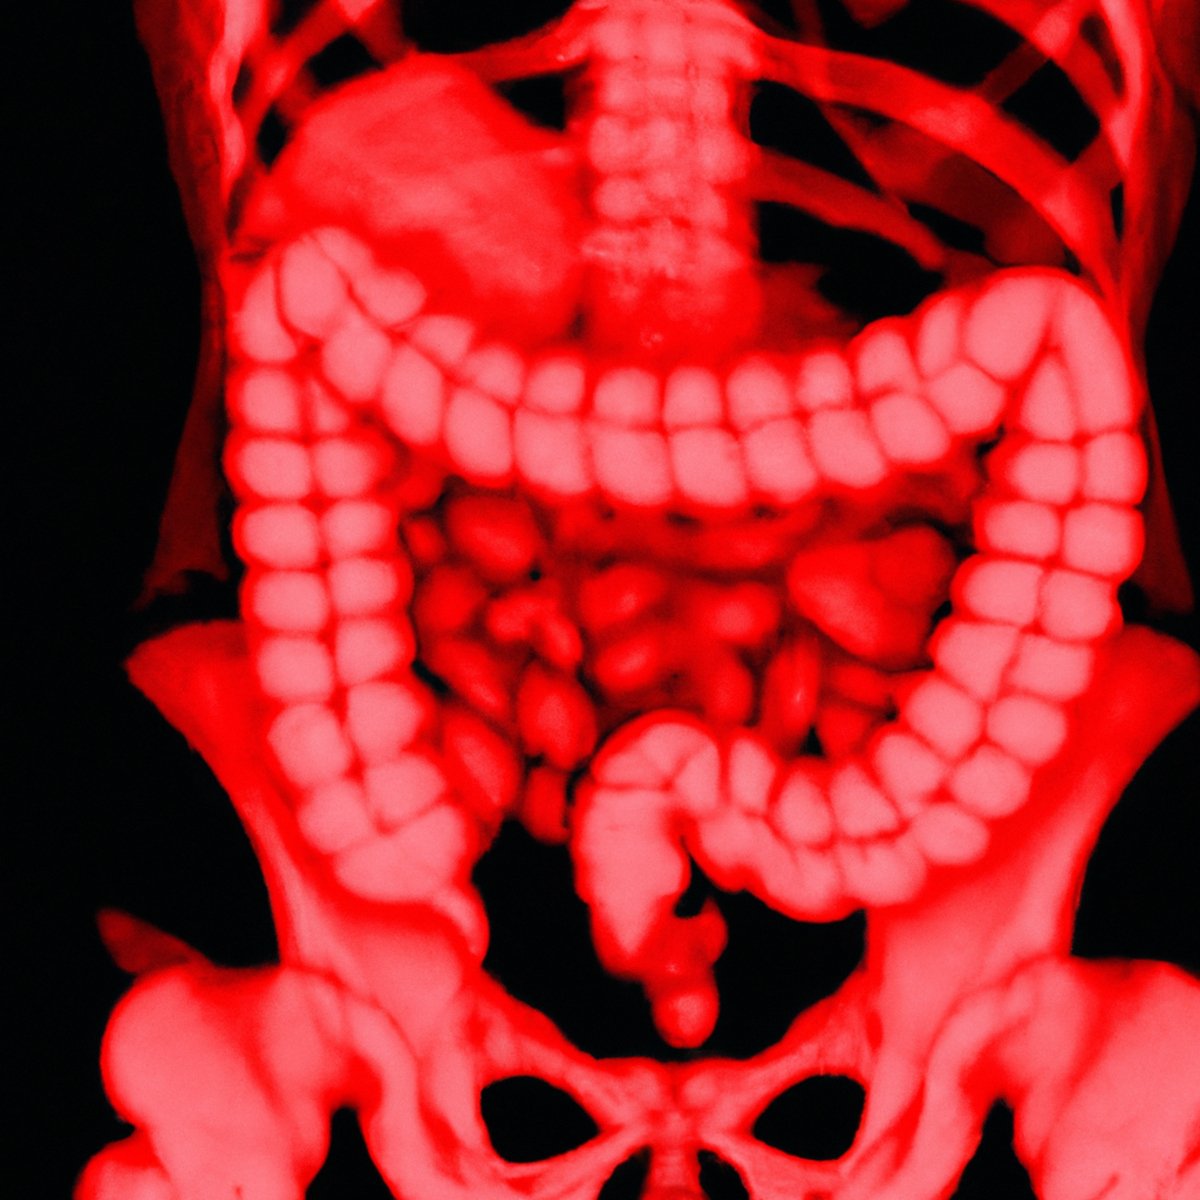 Close-up of stomach lining with thickened folds and enlarged gastric rugae, characteristic of Menetrier's Disease.